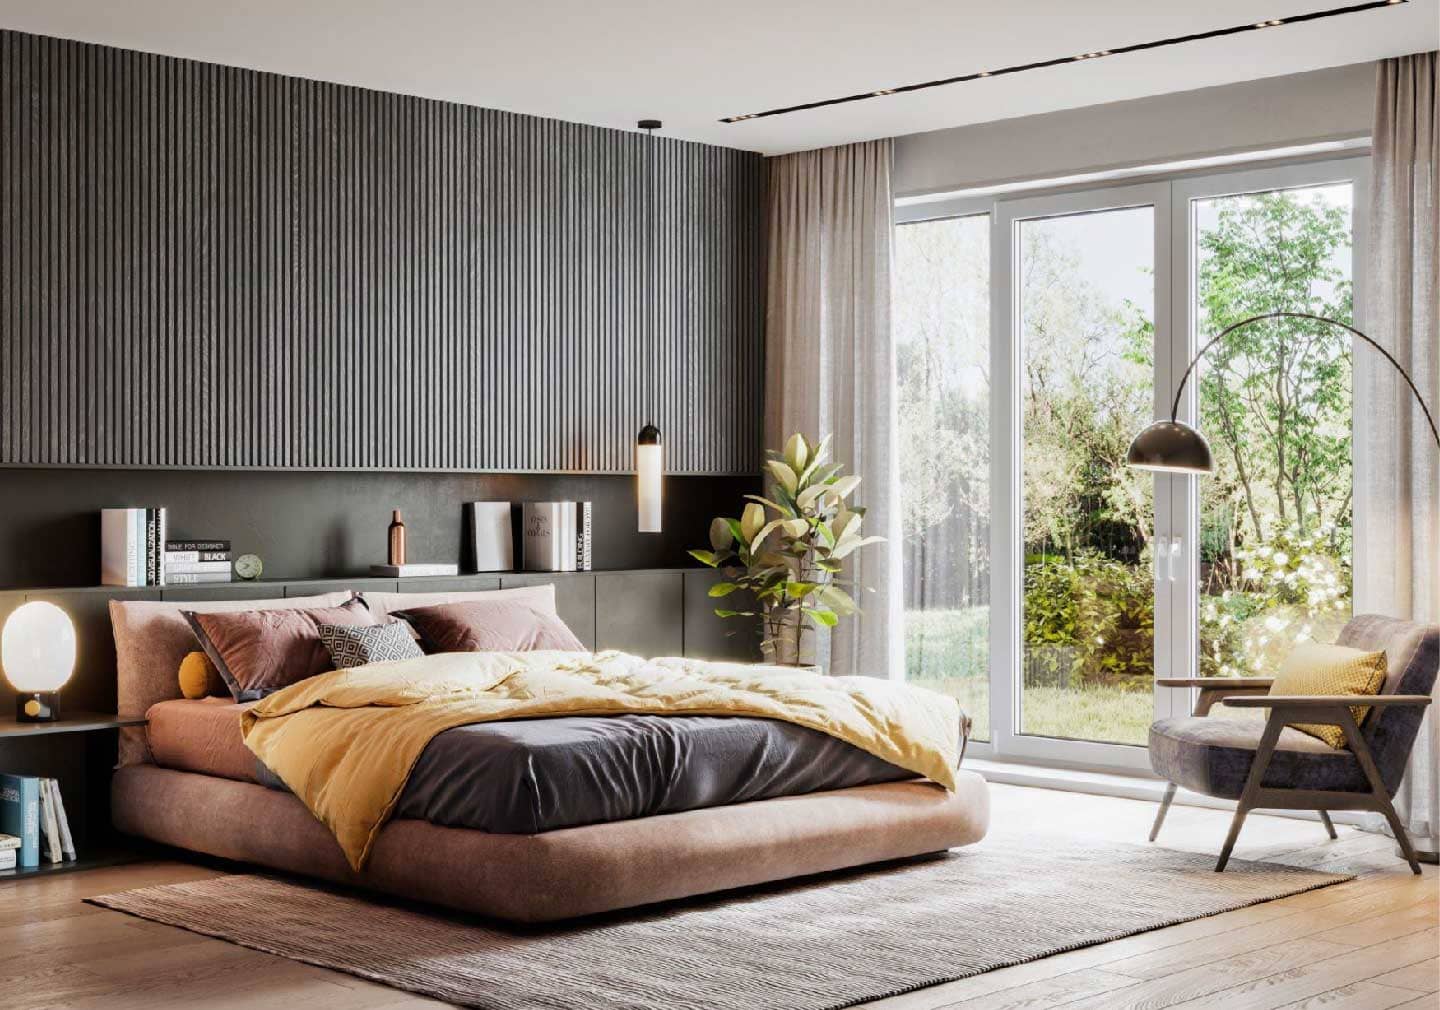 5 tips for your master bedroom designs